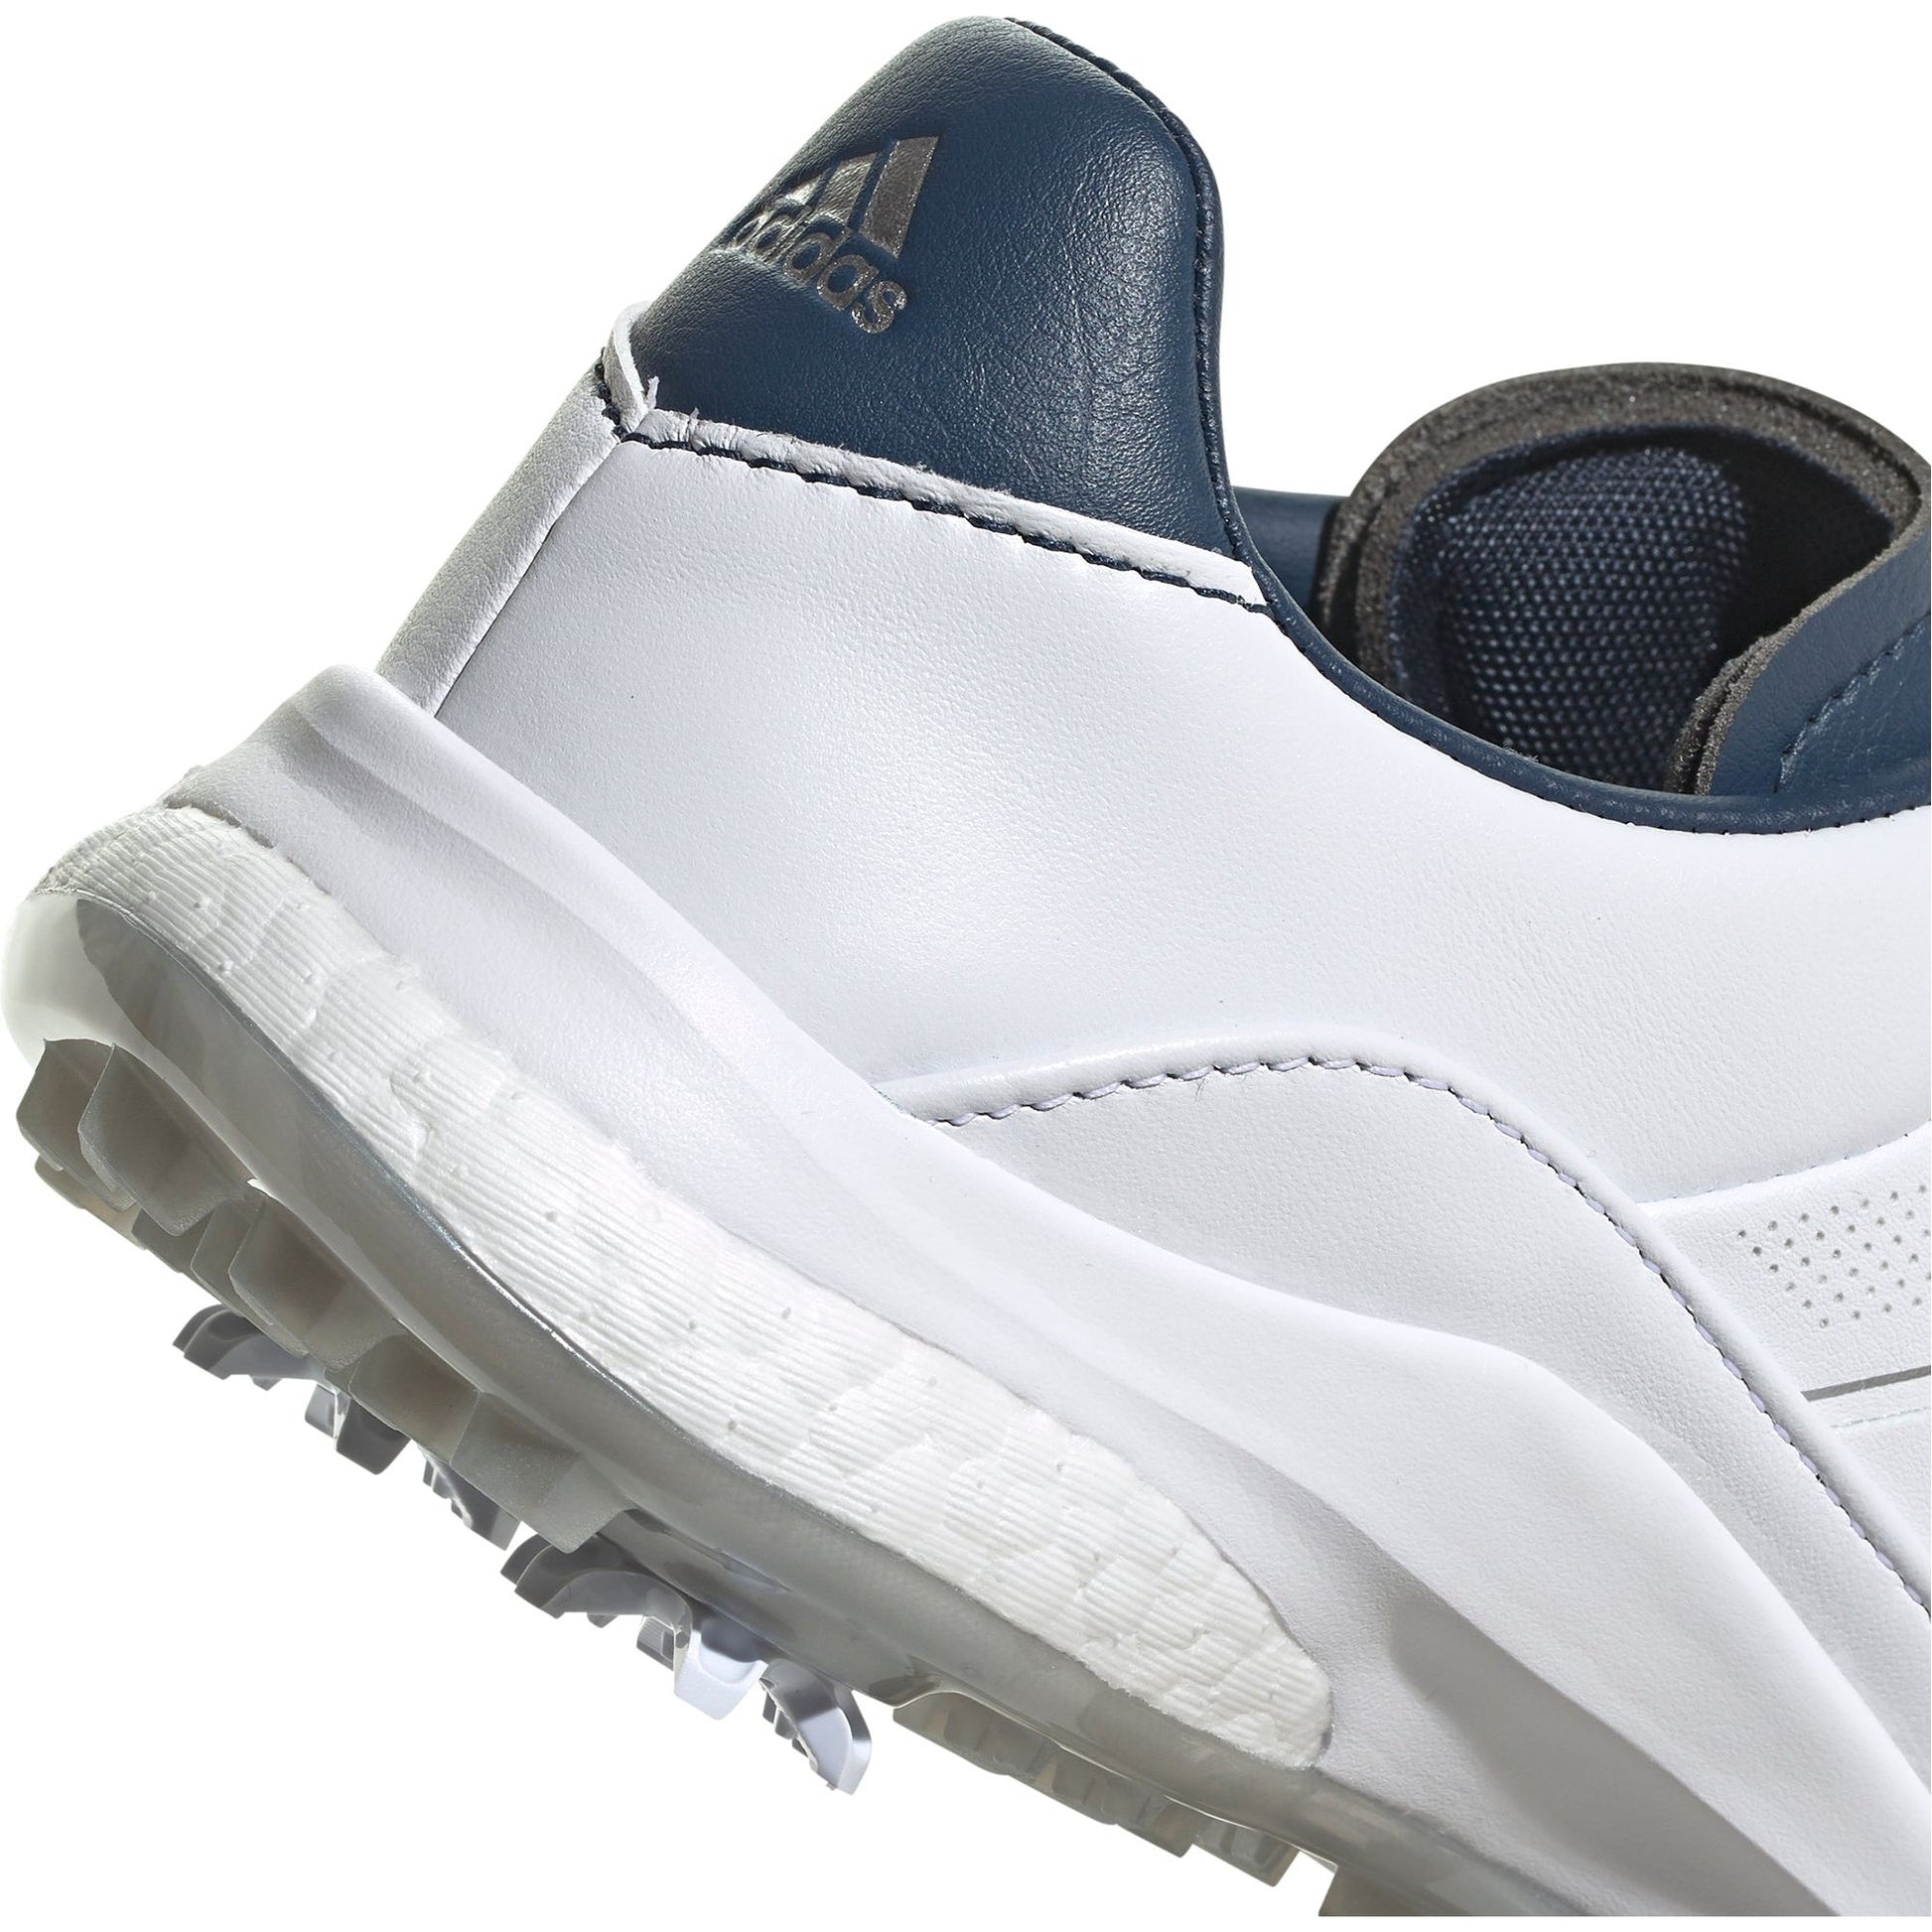 Adidas Performance Classic Golf Shoes Fx4330 Details